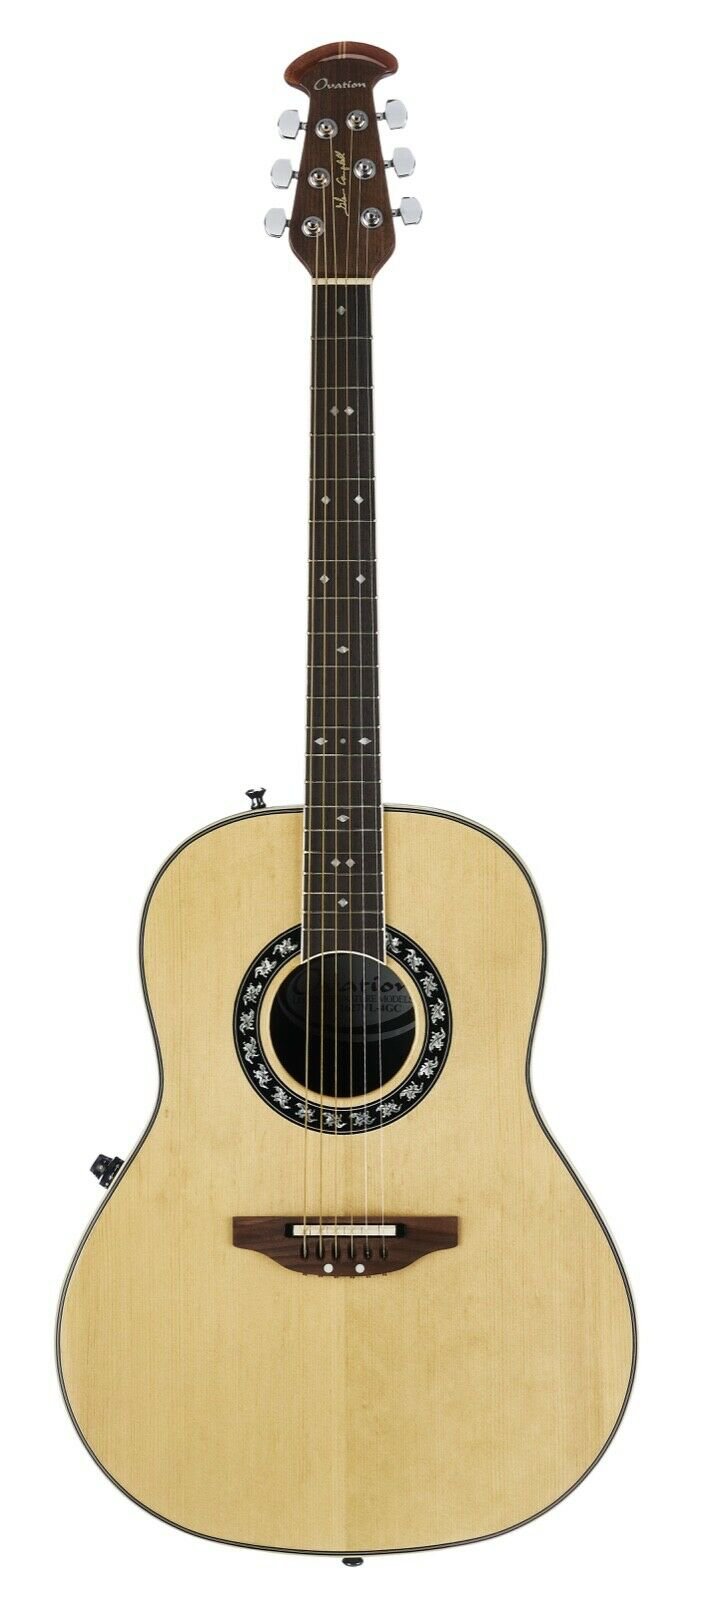 Ovation Signature Collection 6 String Mid Depth Body Acoustic Electric Guitar, Right, Natural, (1627VL-4GC)